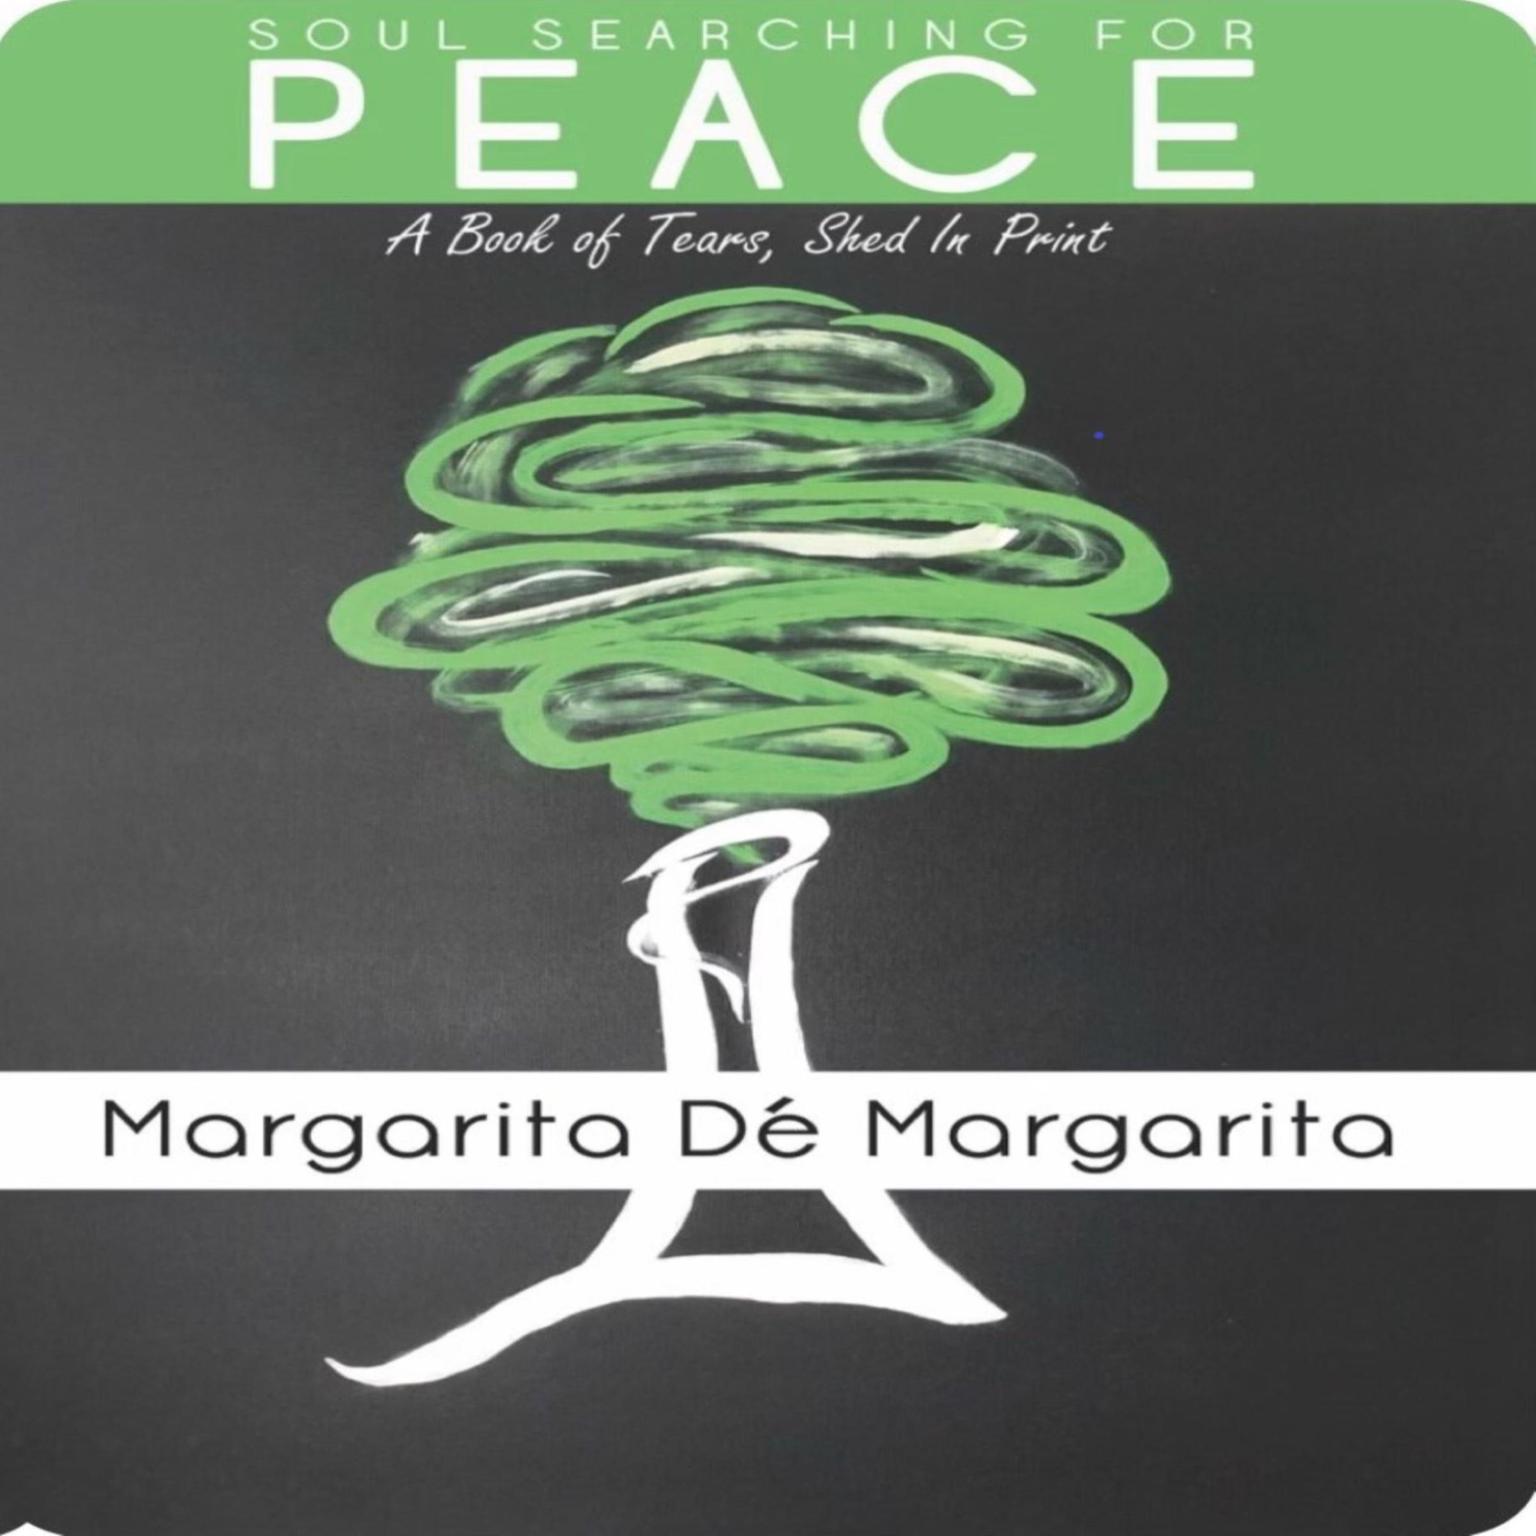 Soul Searching for Peace: A Book of Tears, Shed in Print Audiobook, by Margarita de Margarita